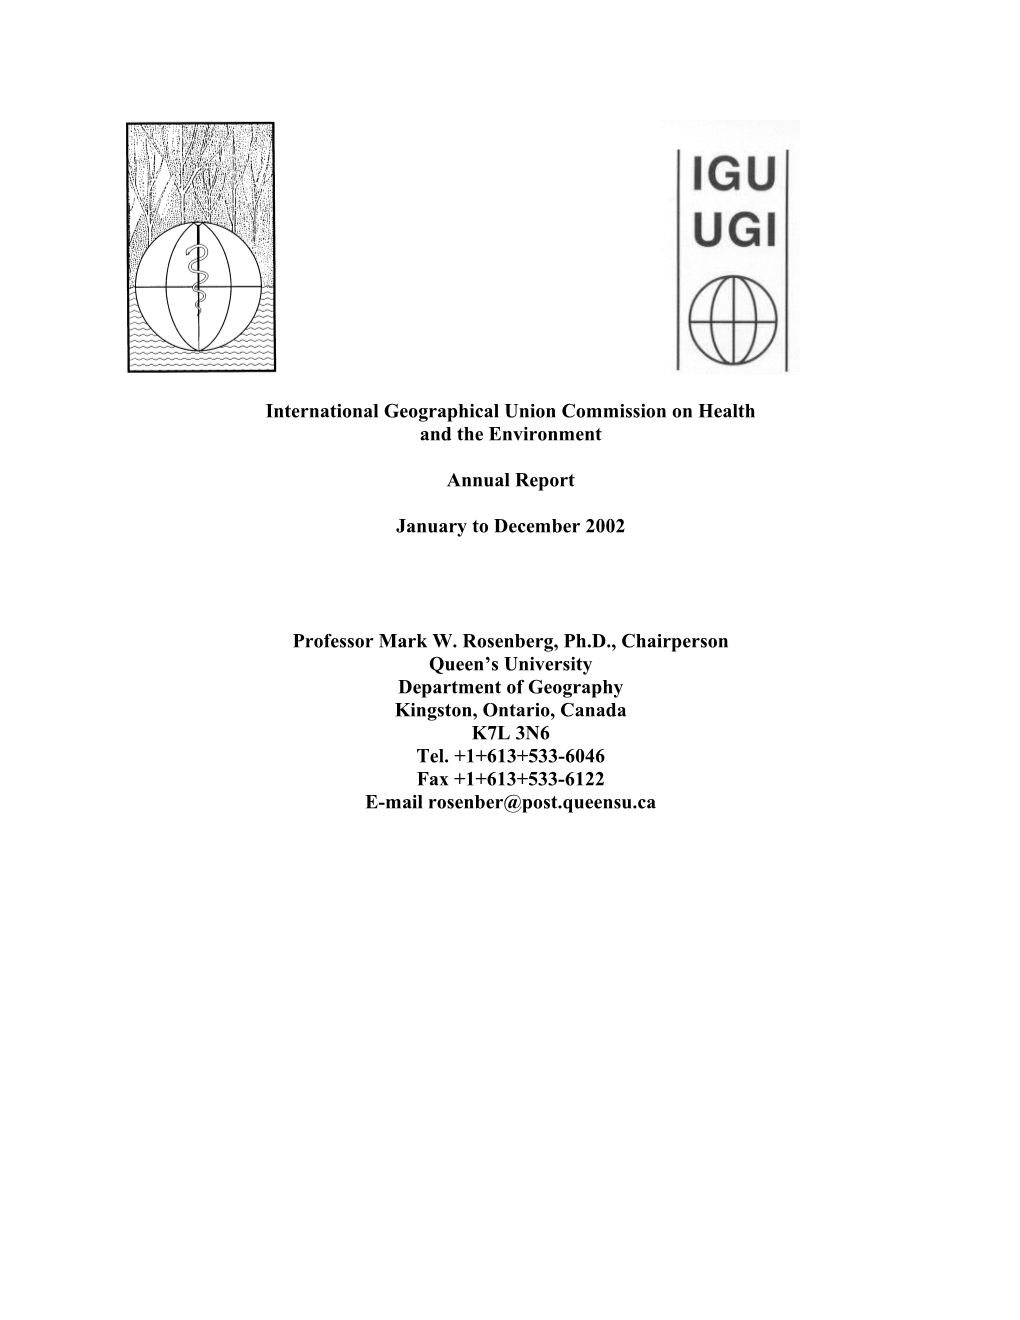 Interim Report of the International Geographical Union Commission